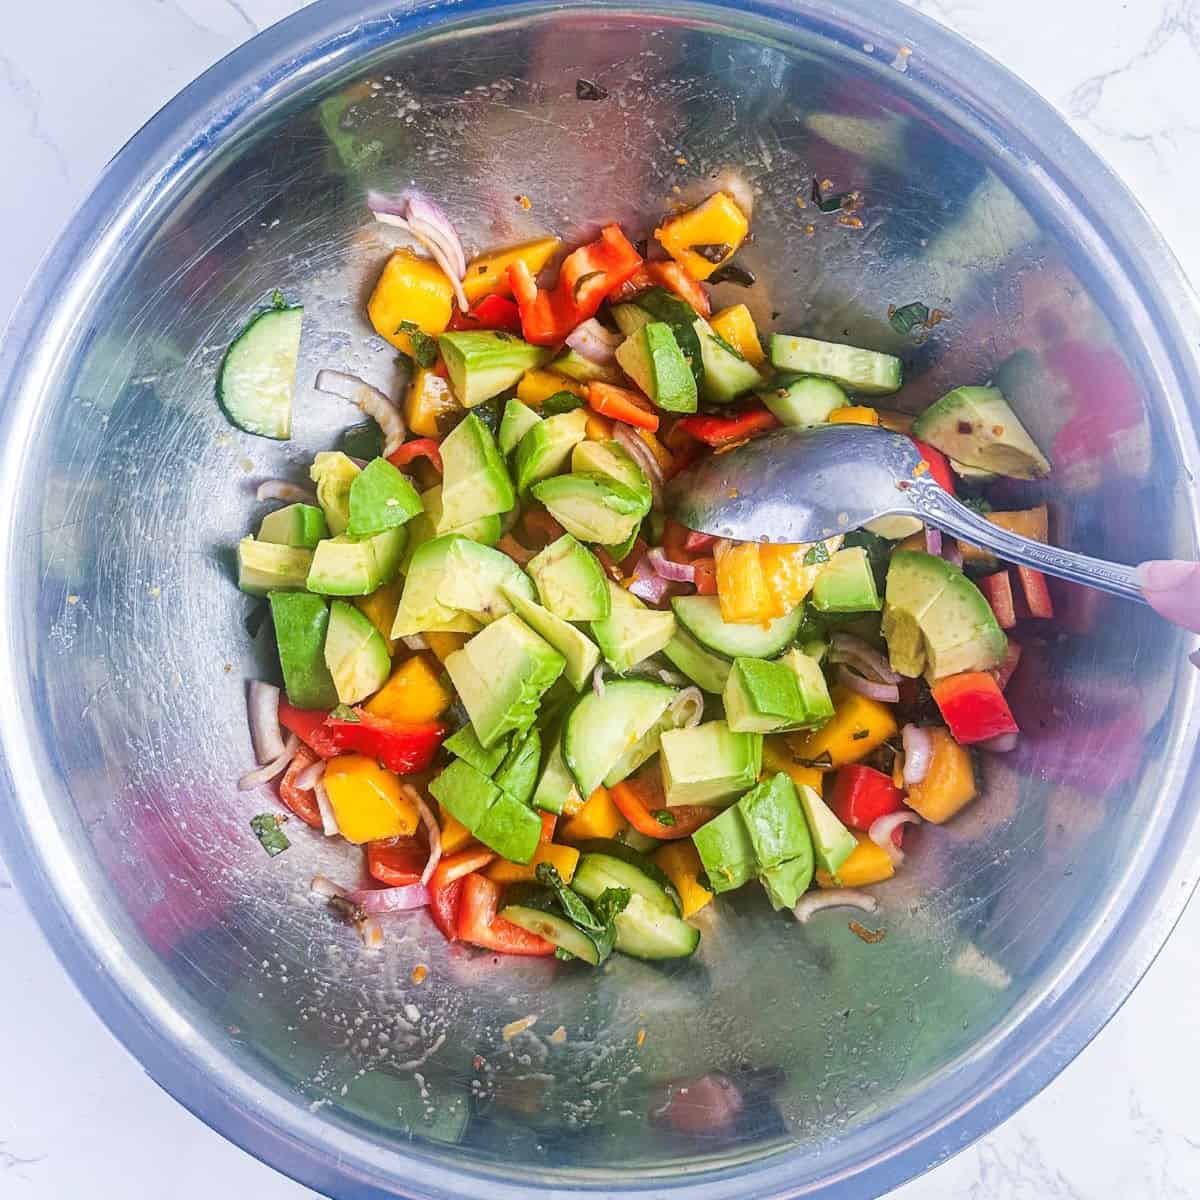 Avocado, cucumber, mango, shallots, bell pepper, and mint in a silver mixing bowl.